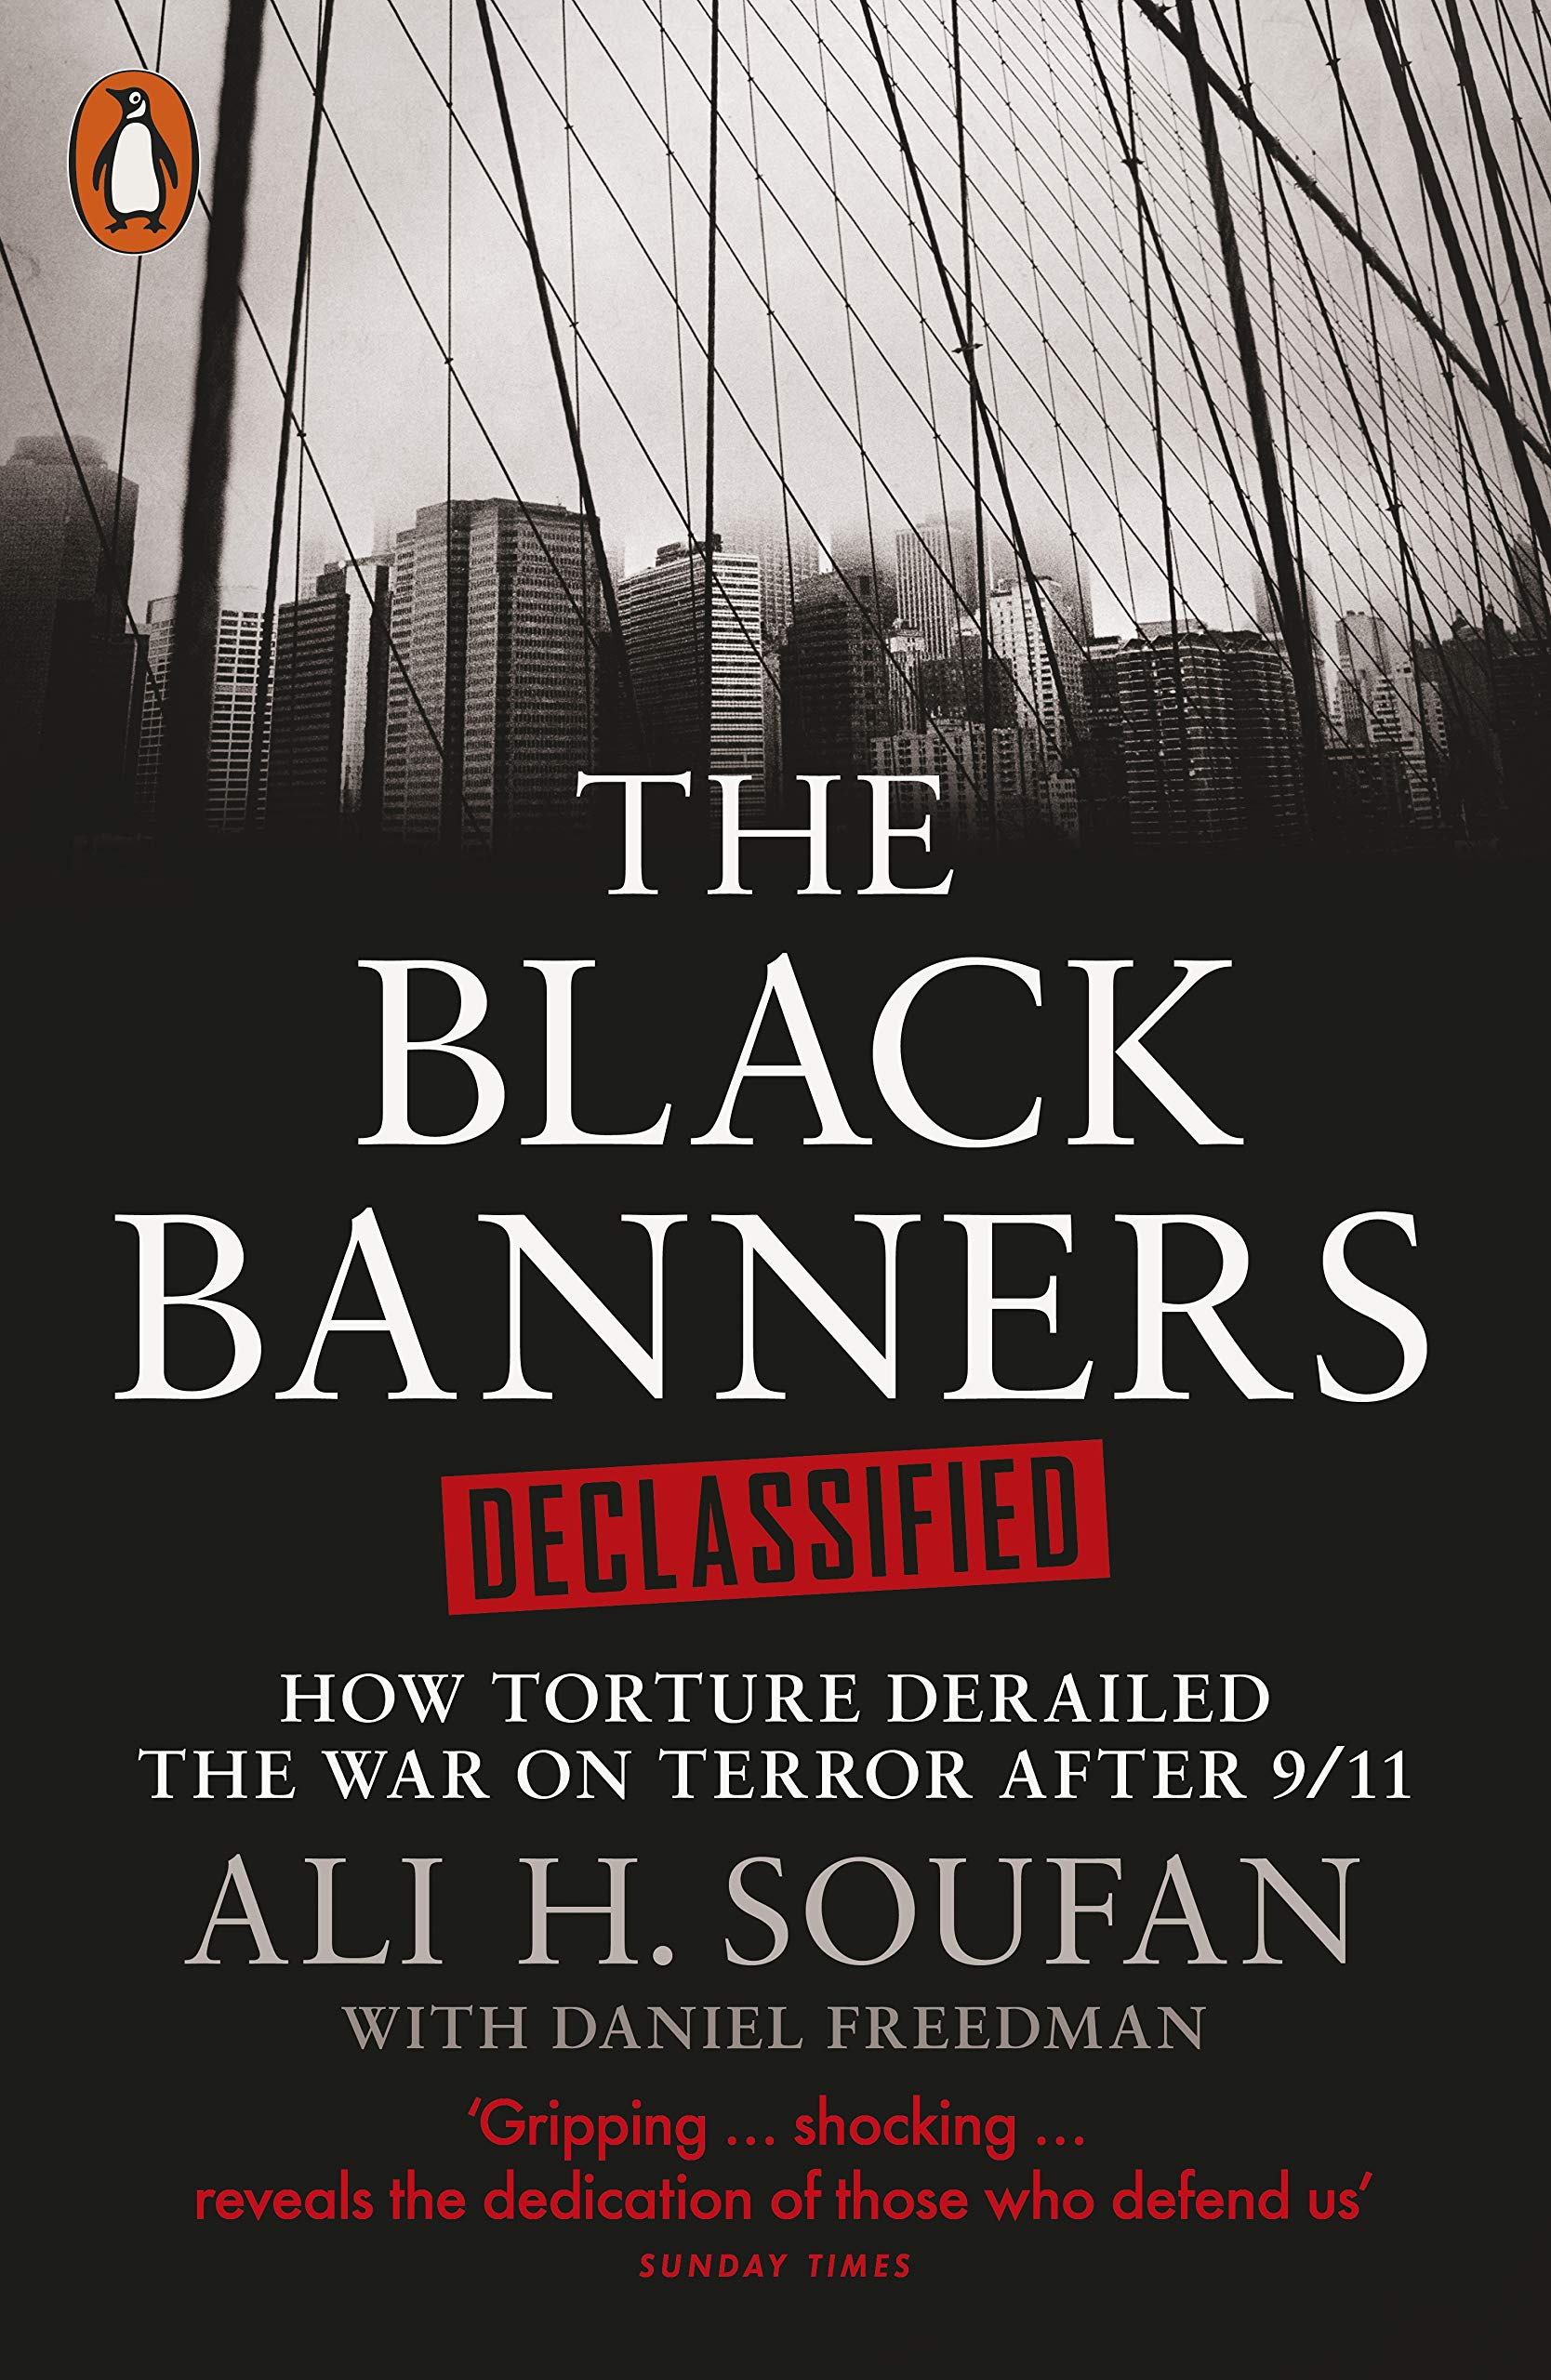 The Black Banners Declassified